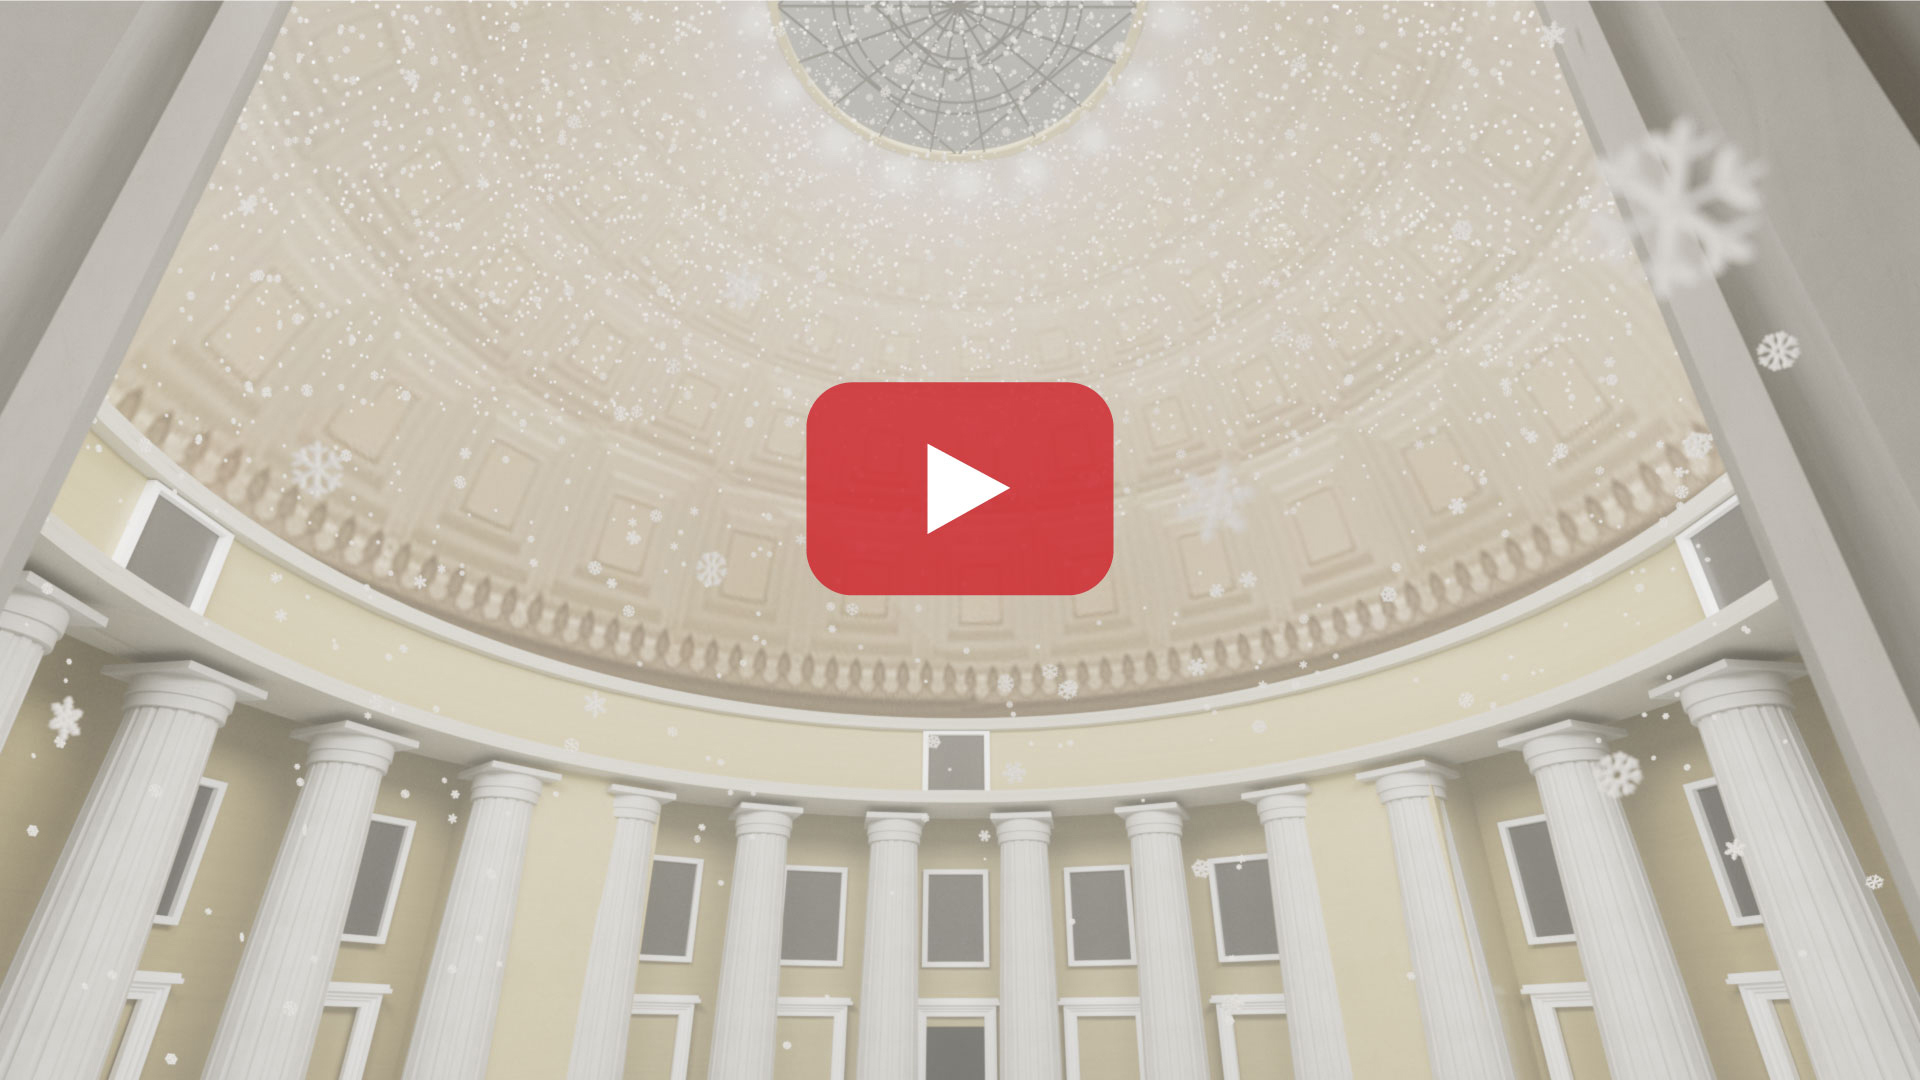 video still of holiday greeting showing the inside of Barker Library dome